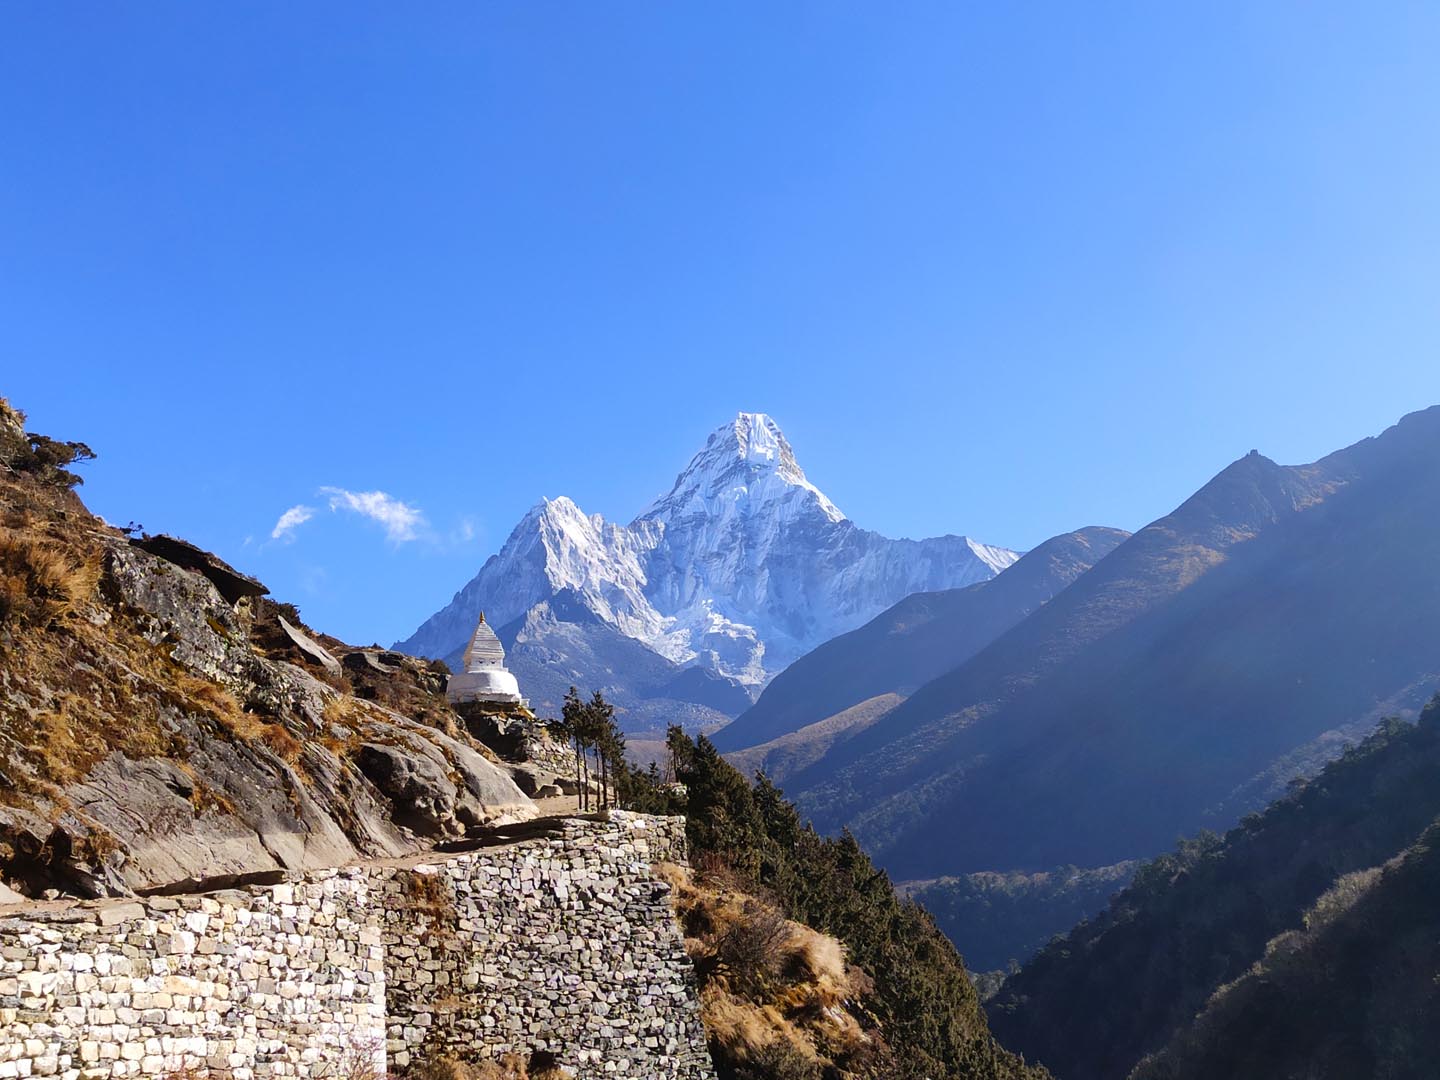 On the way to Dingboche